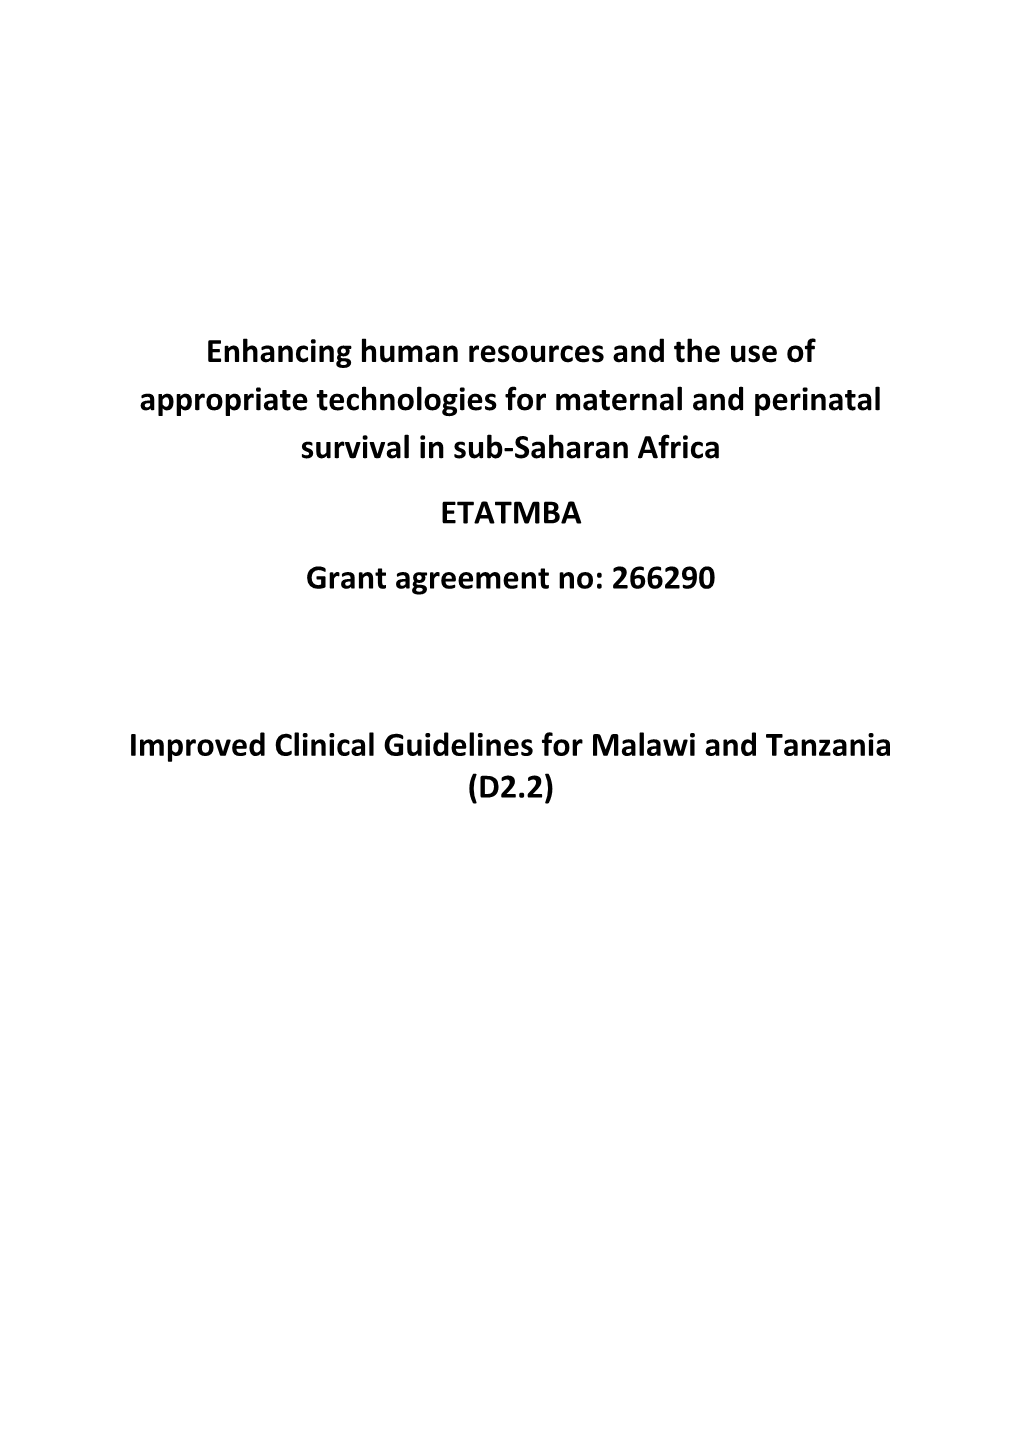 Improved Clinical Guidelines for Malawi and Tanzania (D2.2)